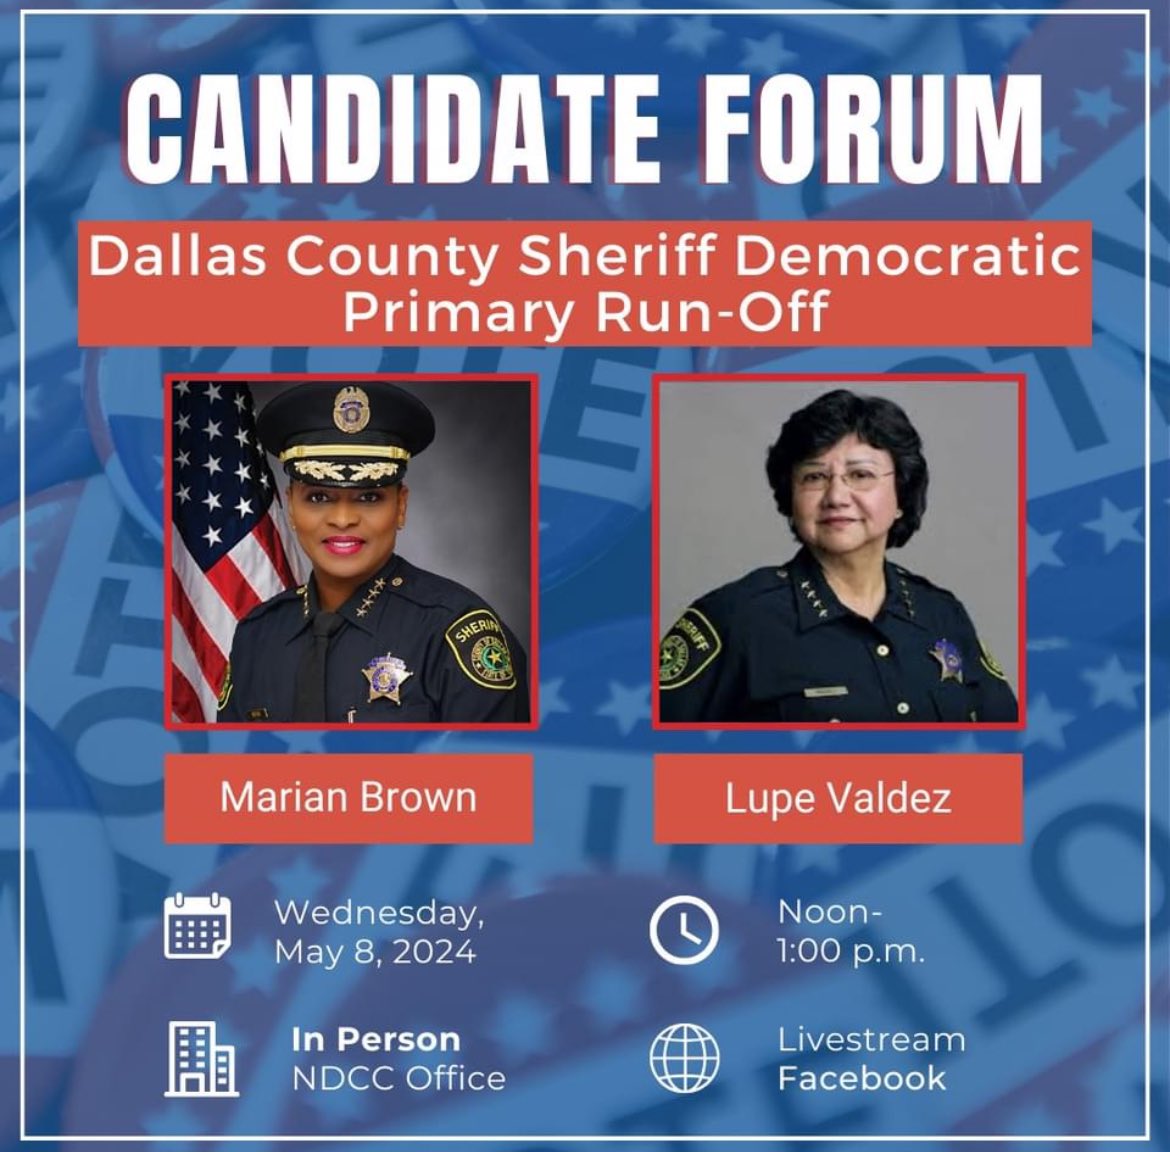 Candidate Forum for Dallas County Sheriff on Wednesday, May 8 at noon. Co-hosted with @lwvdallastx and @EngageDallas_. Lunch is included. Please RSVP: ndcc.org